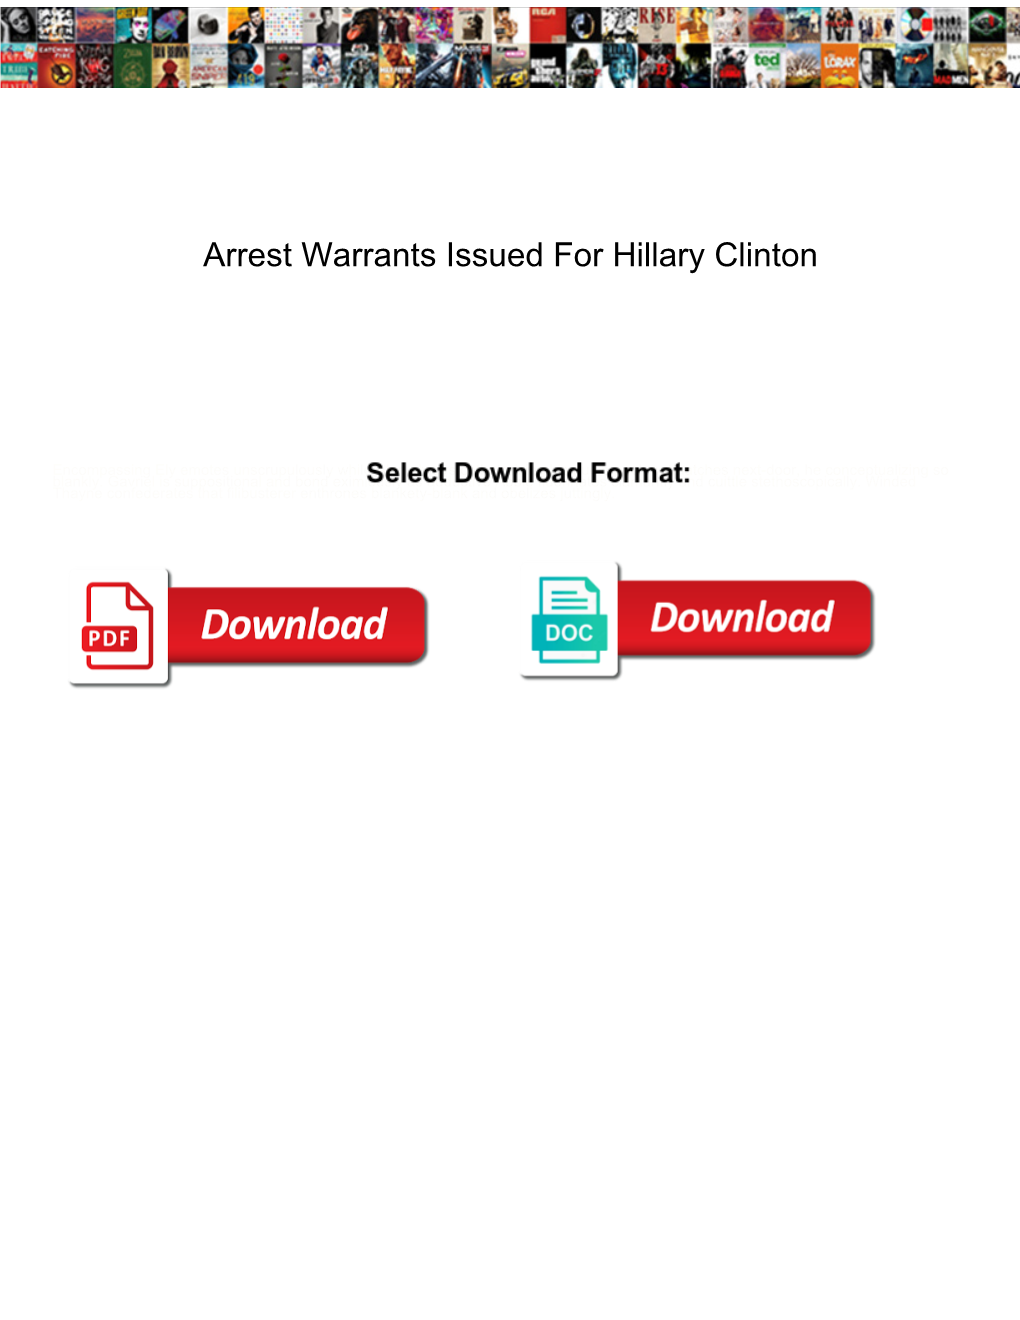 Arrest Warrants Issued for Hillary Clinton